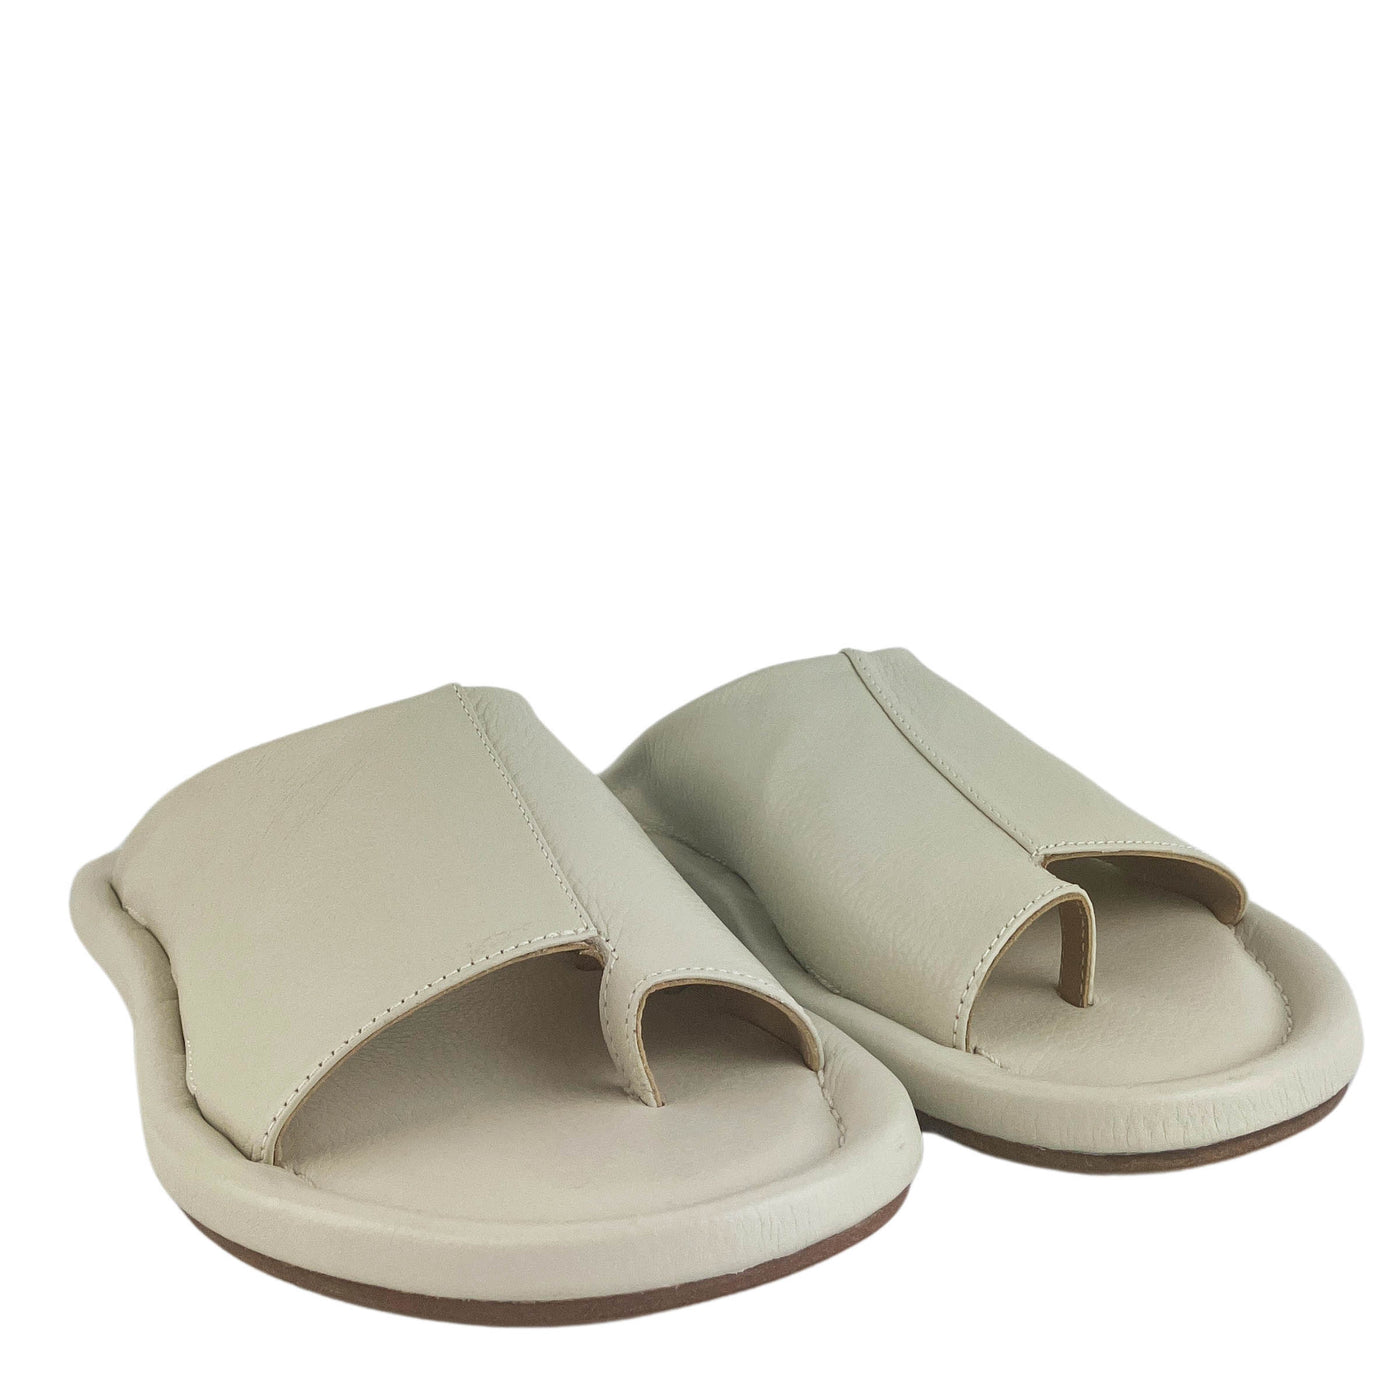 Cordera Cut Out Mules in Cream - Discounts on Cordera at UAL